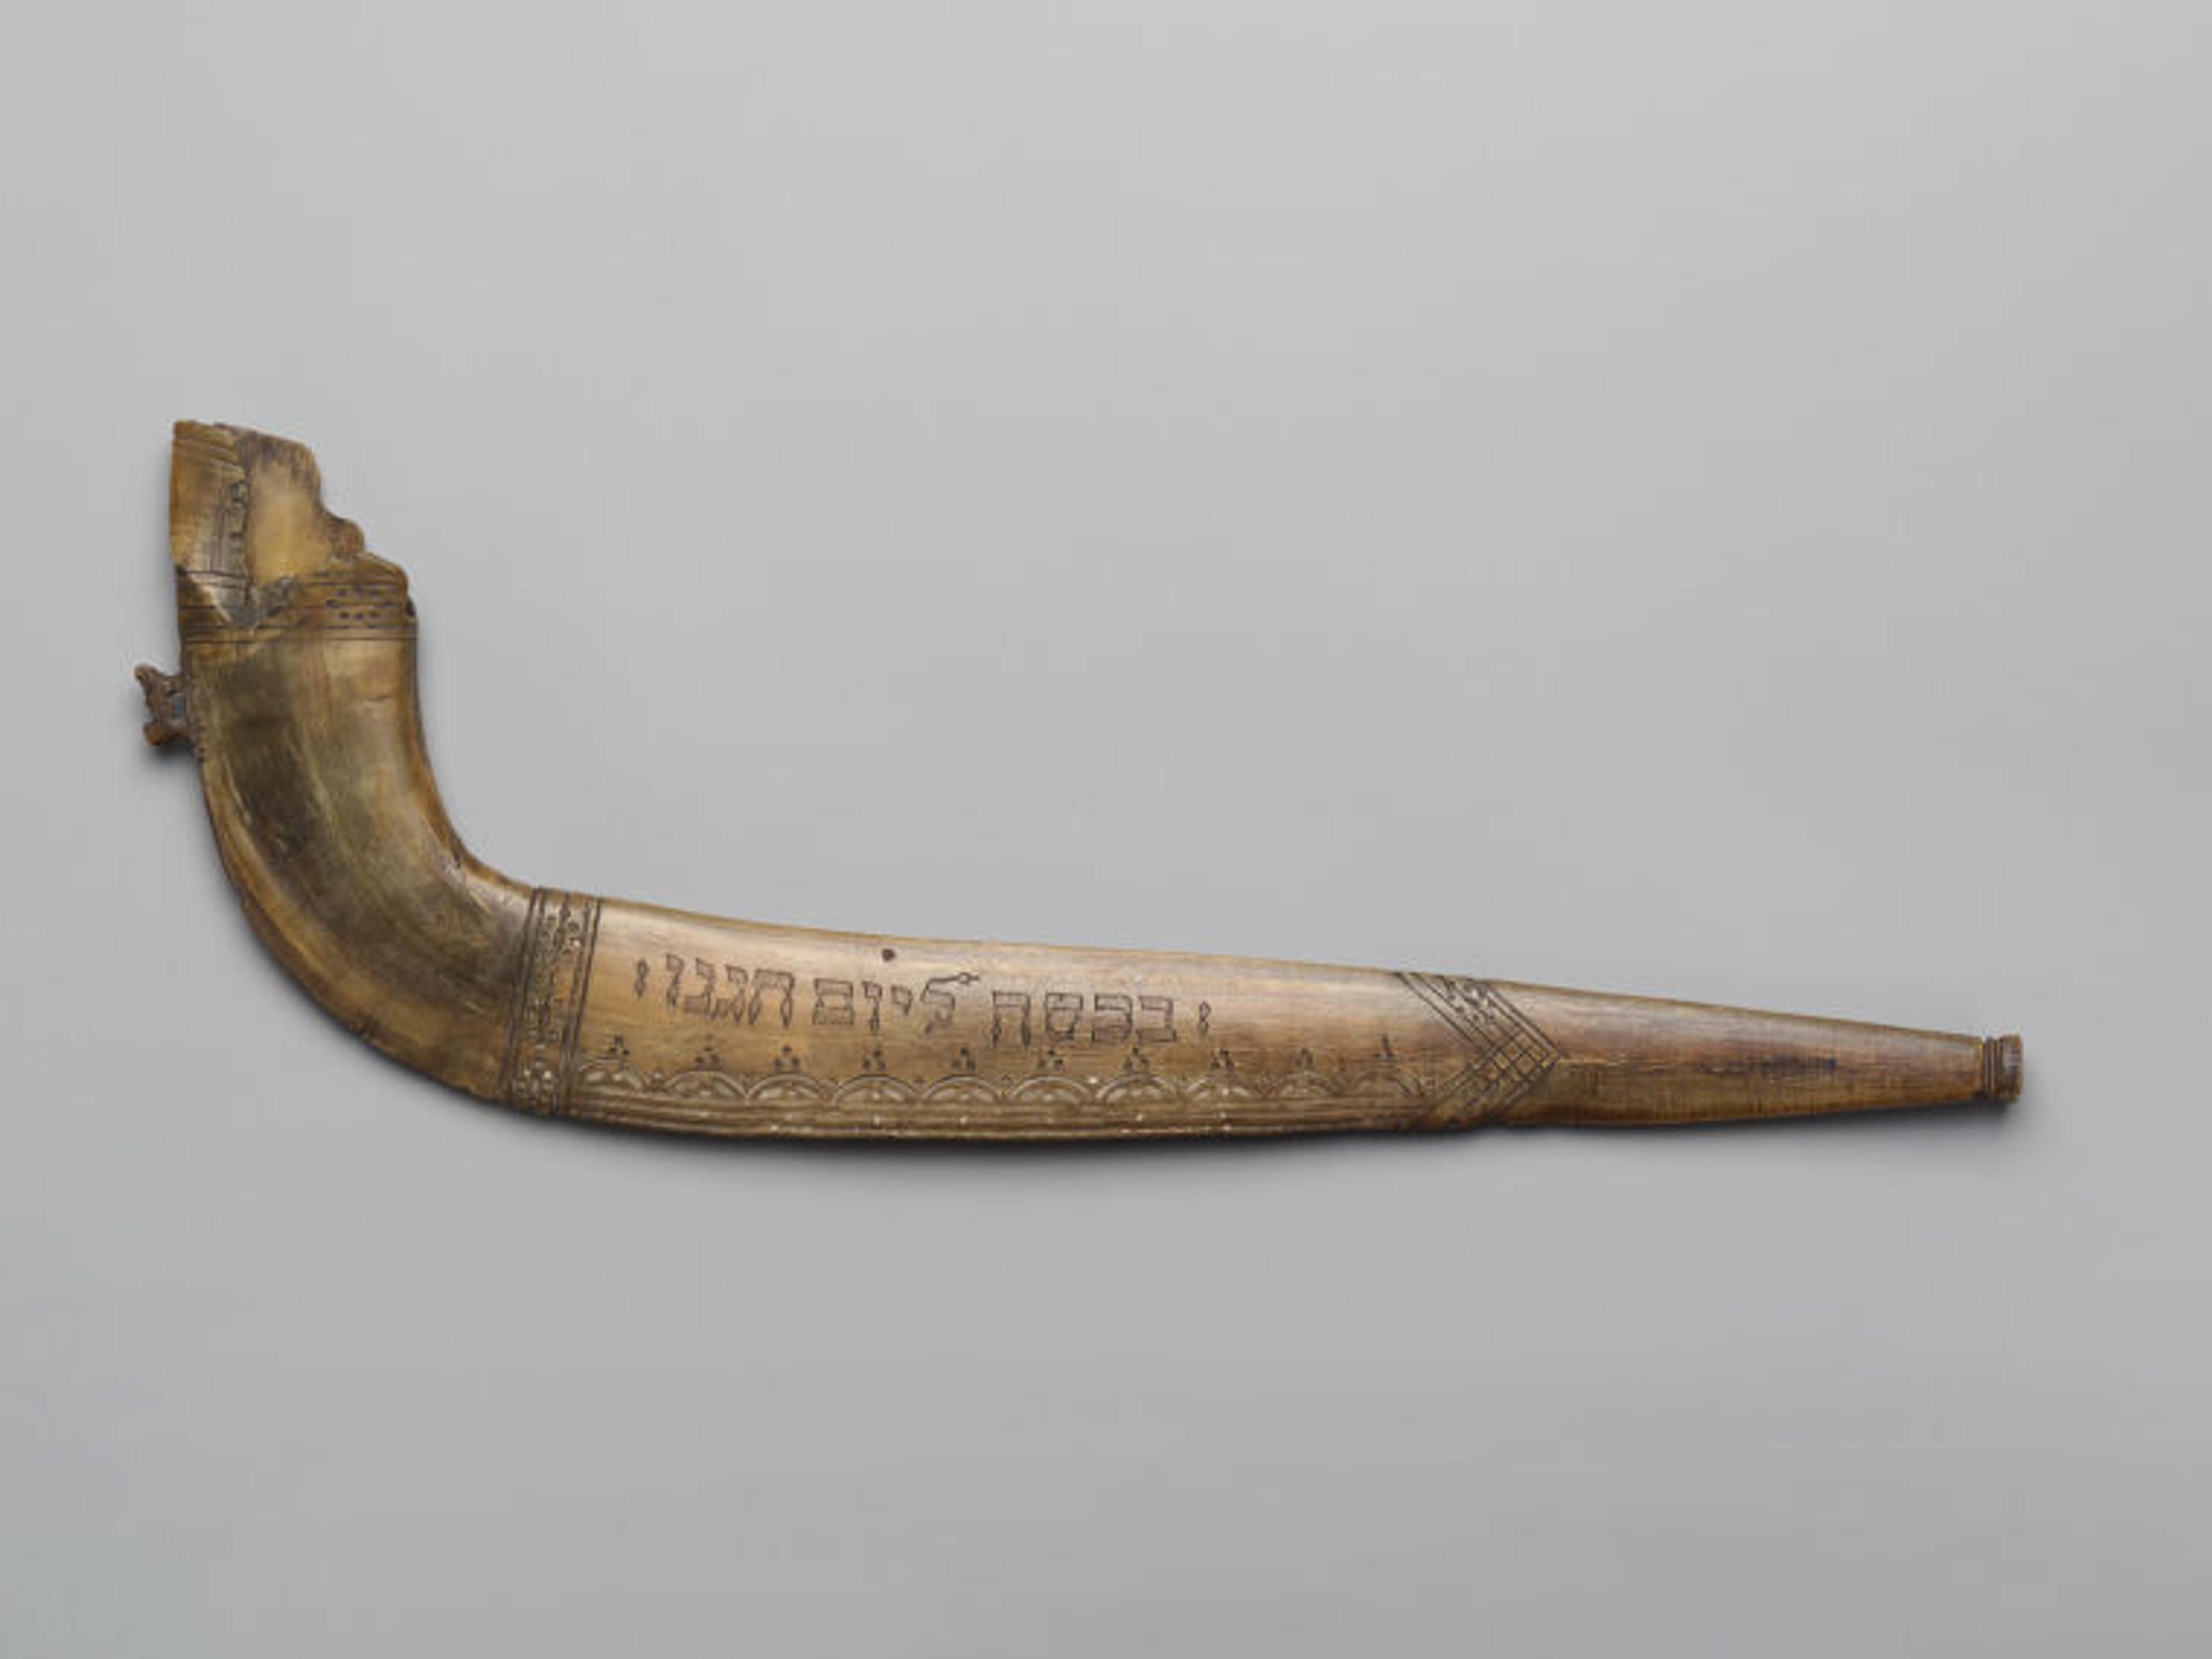 European shofar from The Met collection